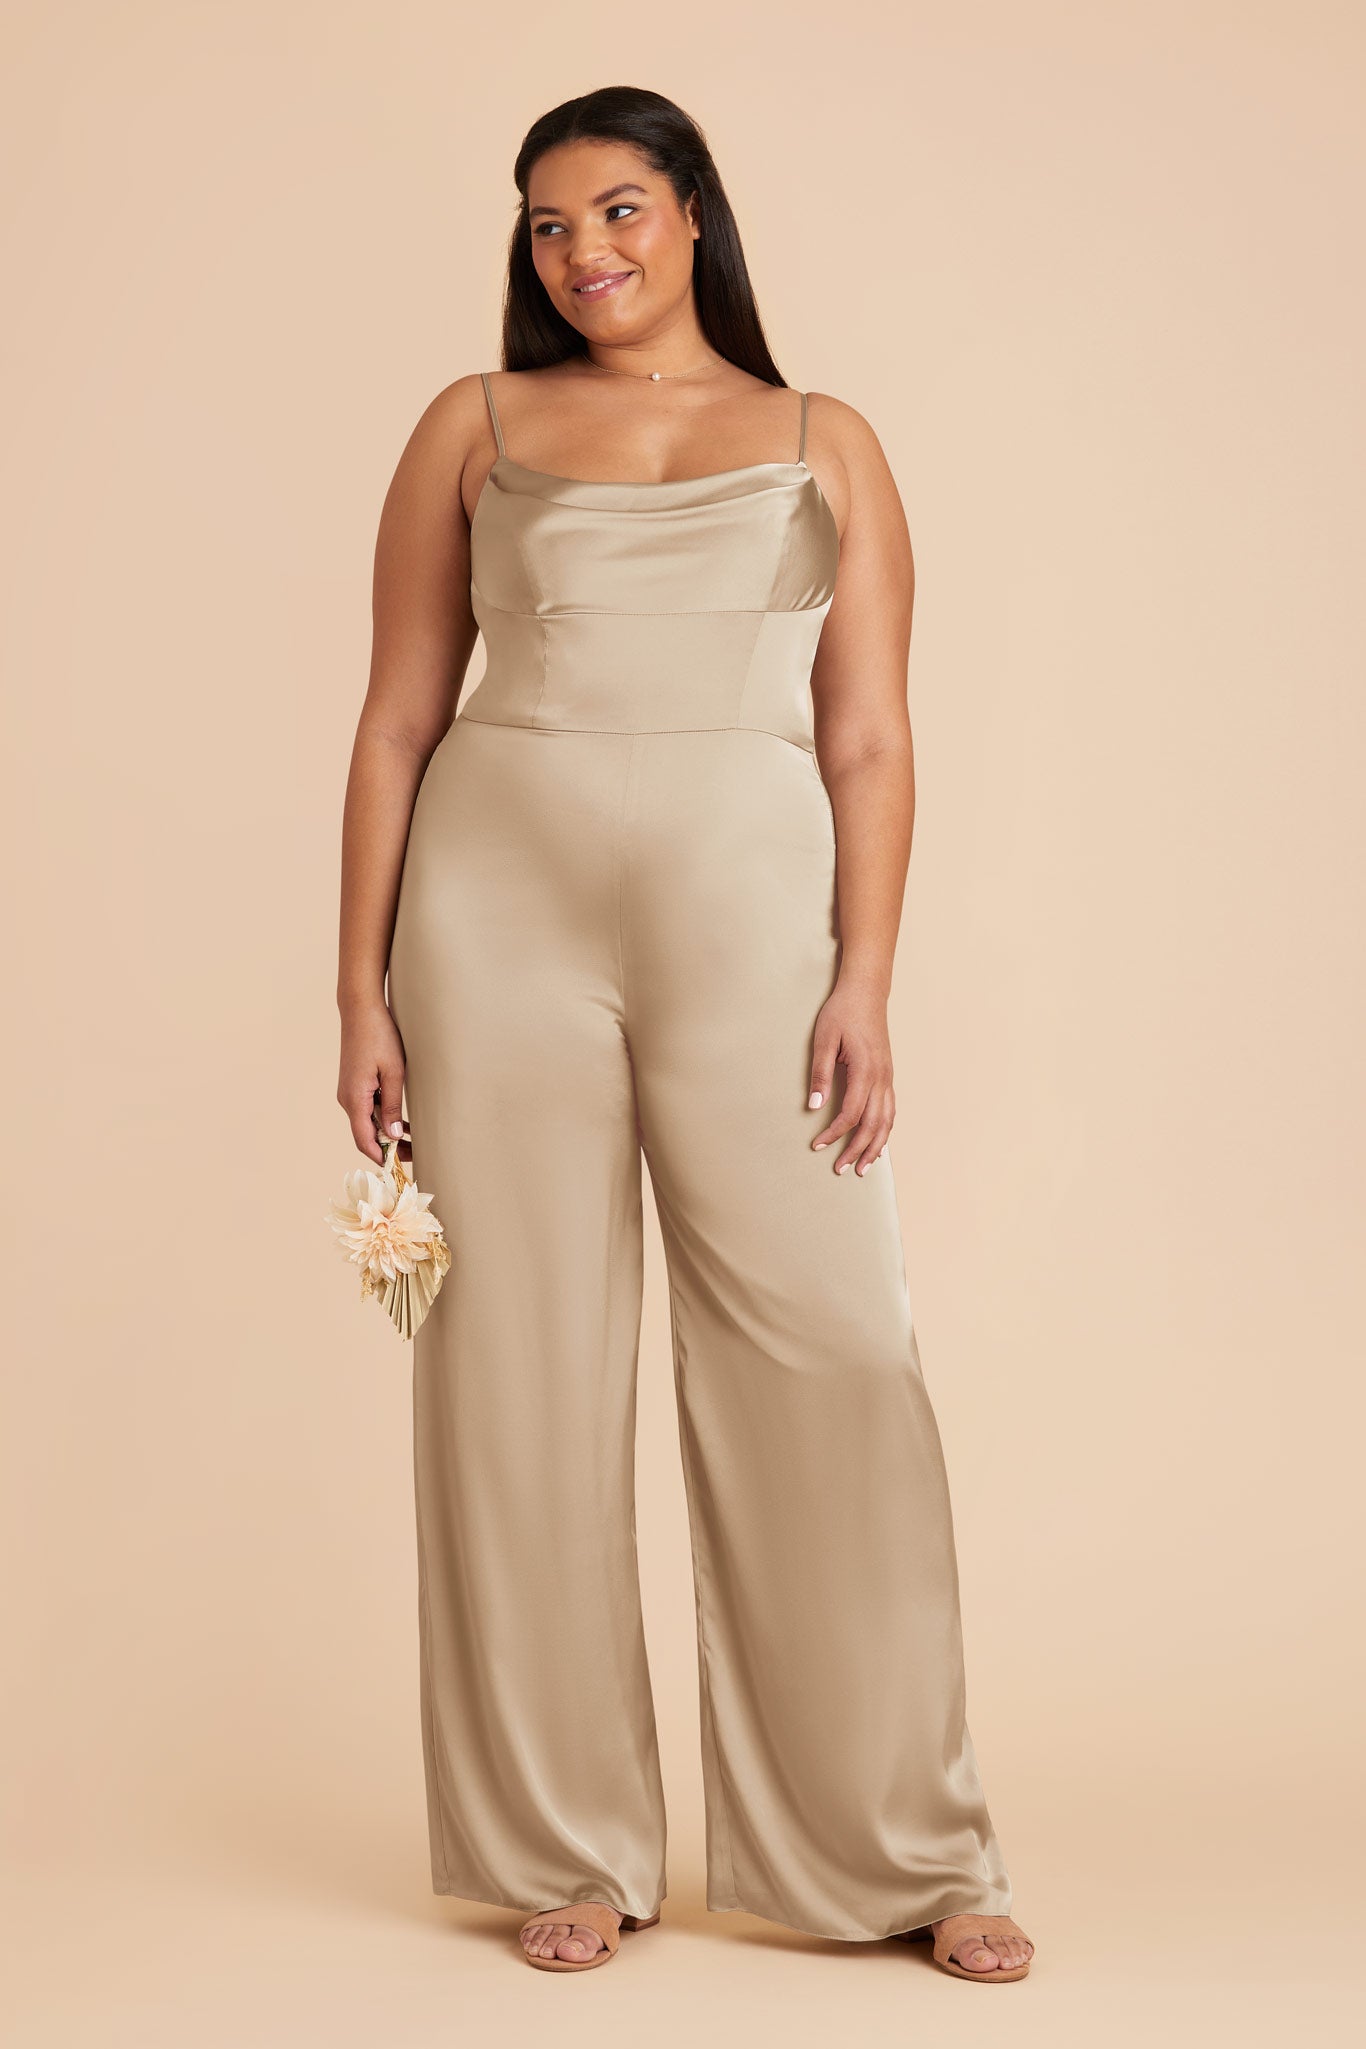 Neutral Champagne Donna Matte Satin Bridesmaid Jumpsuit by Birdy Grey